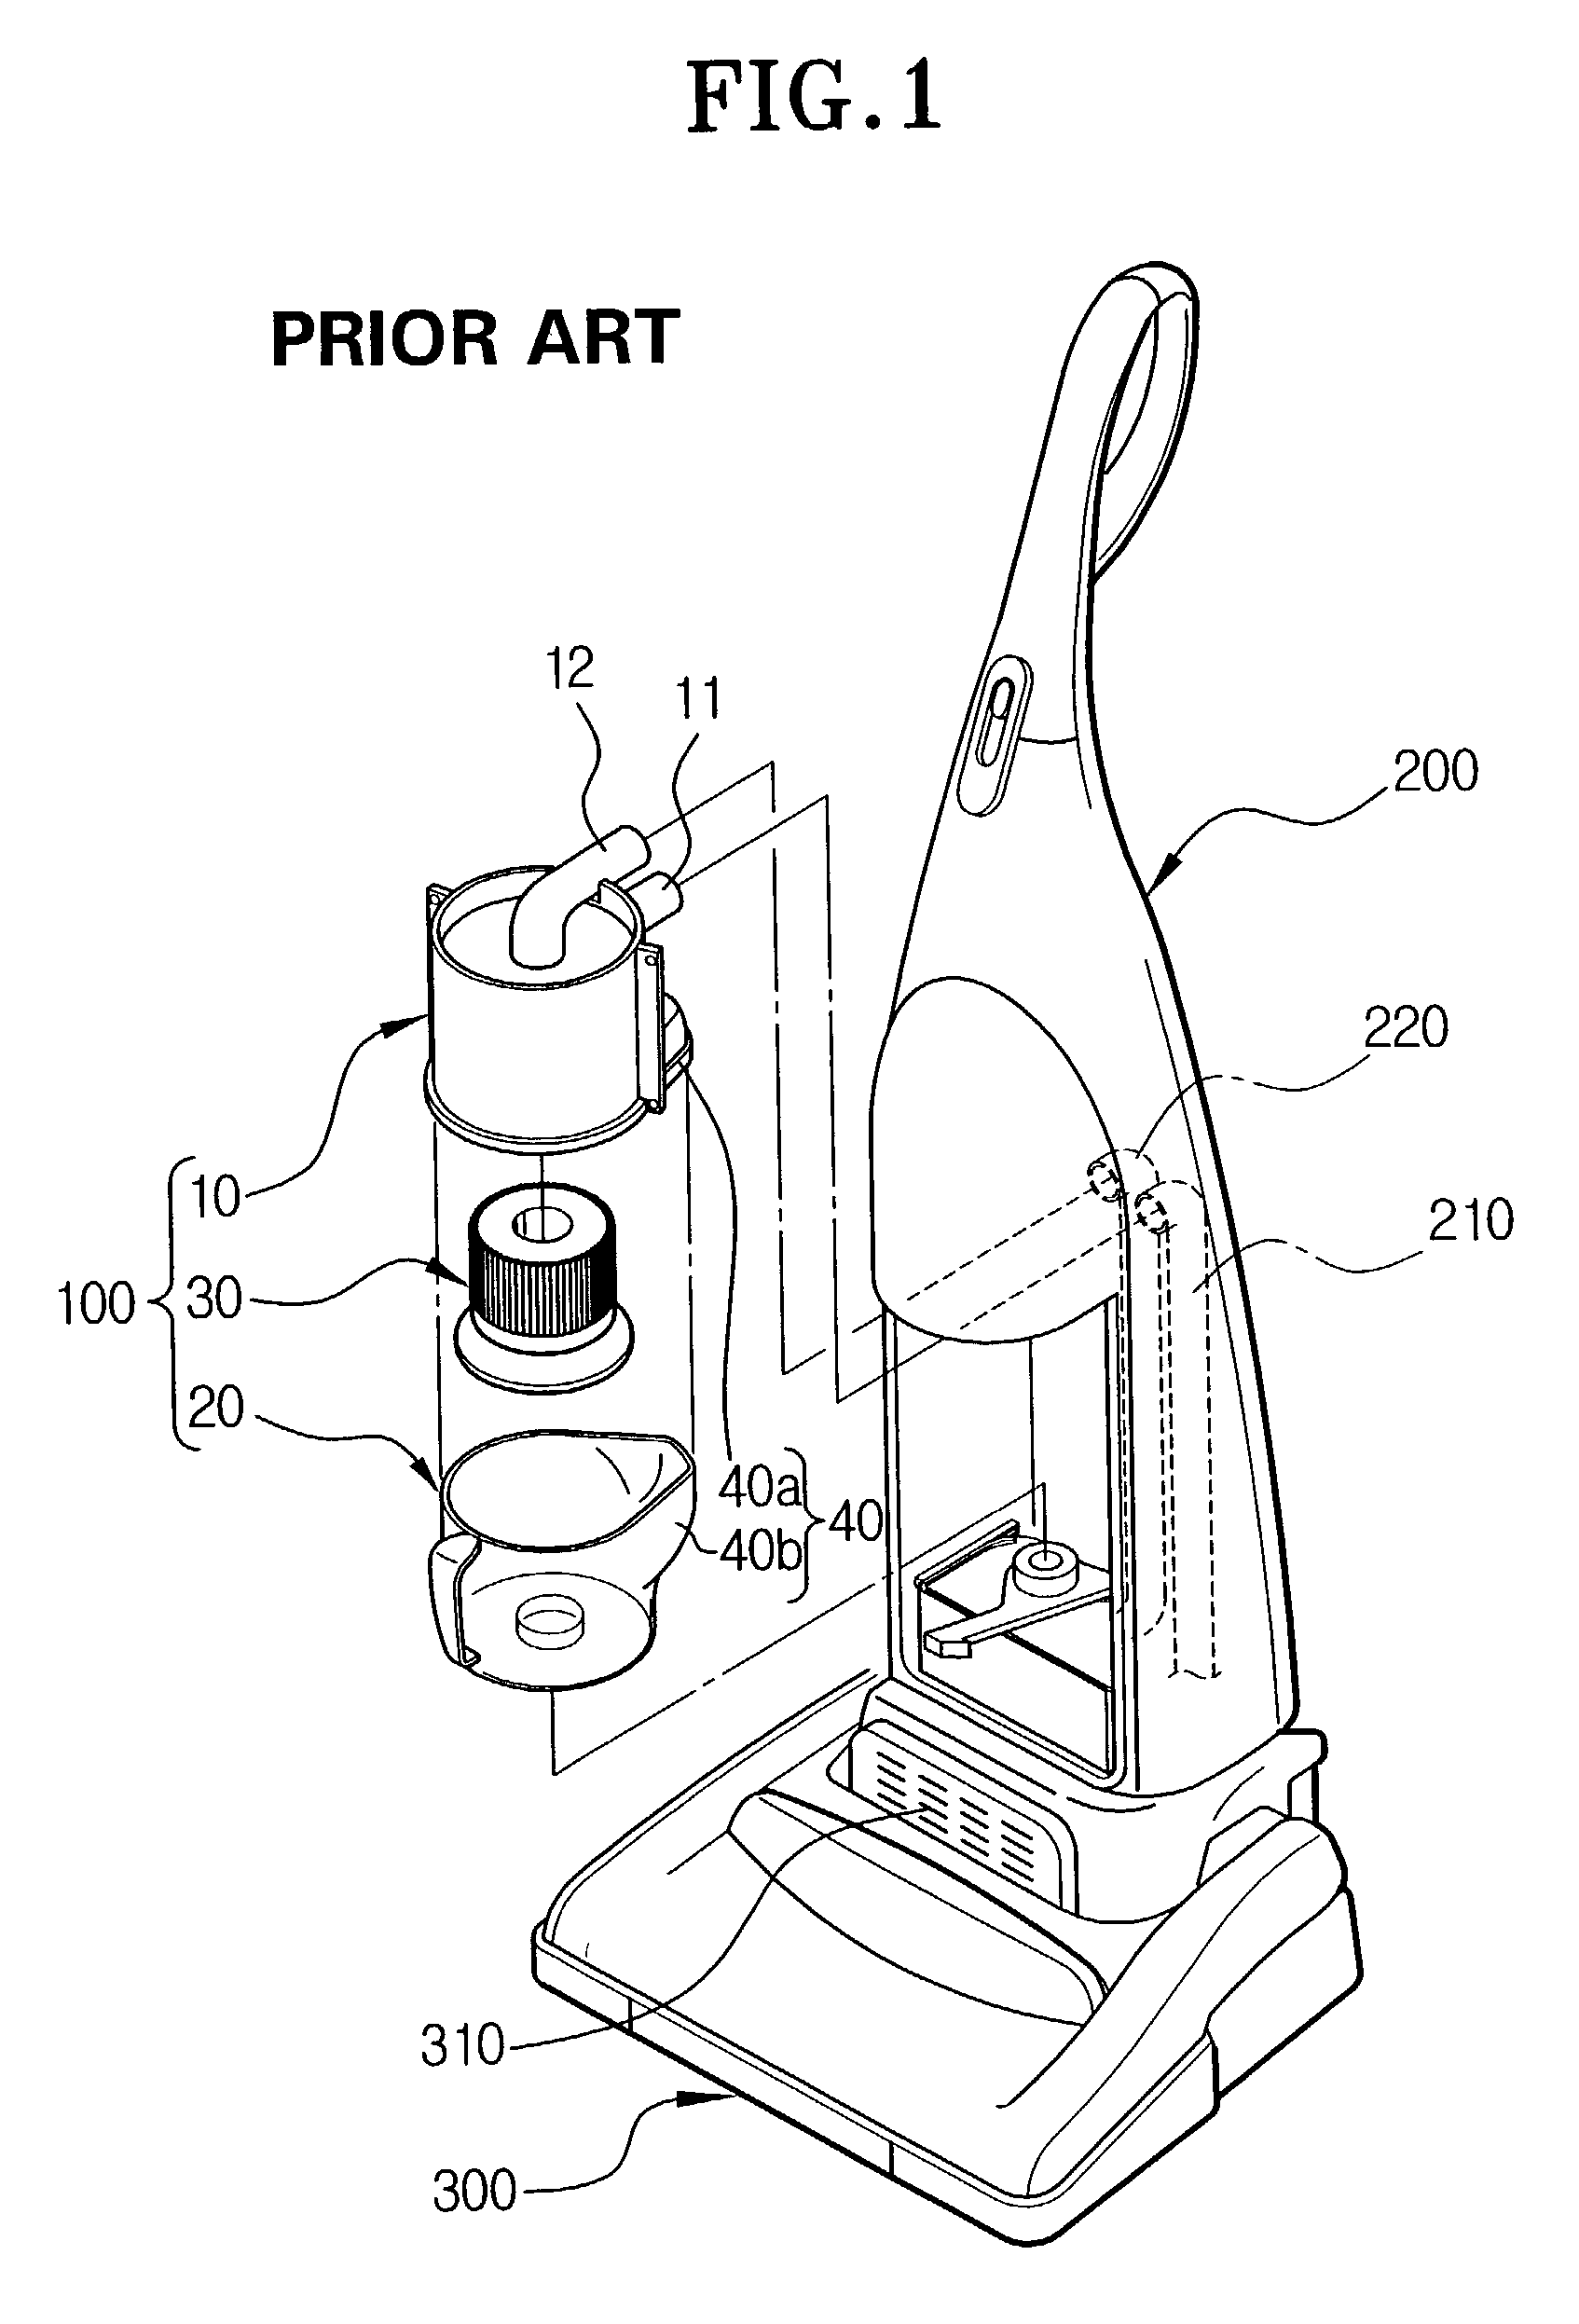 Vacuum cleaner with ultraviolet sterilization lamp